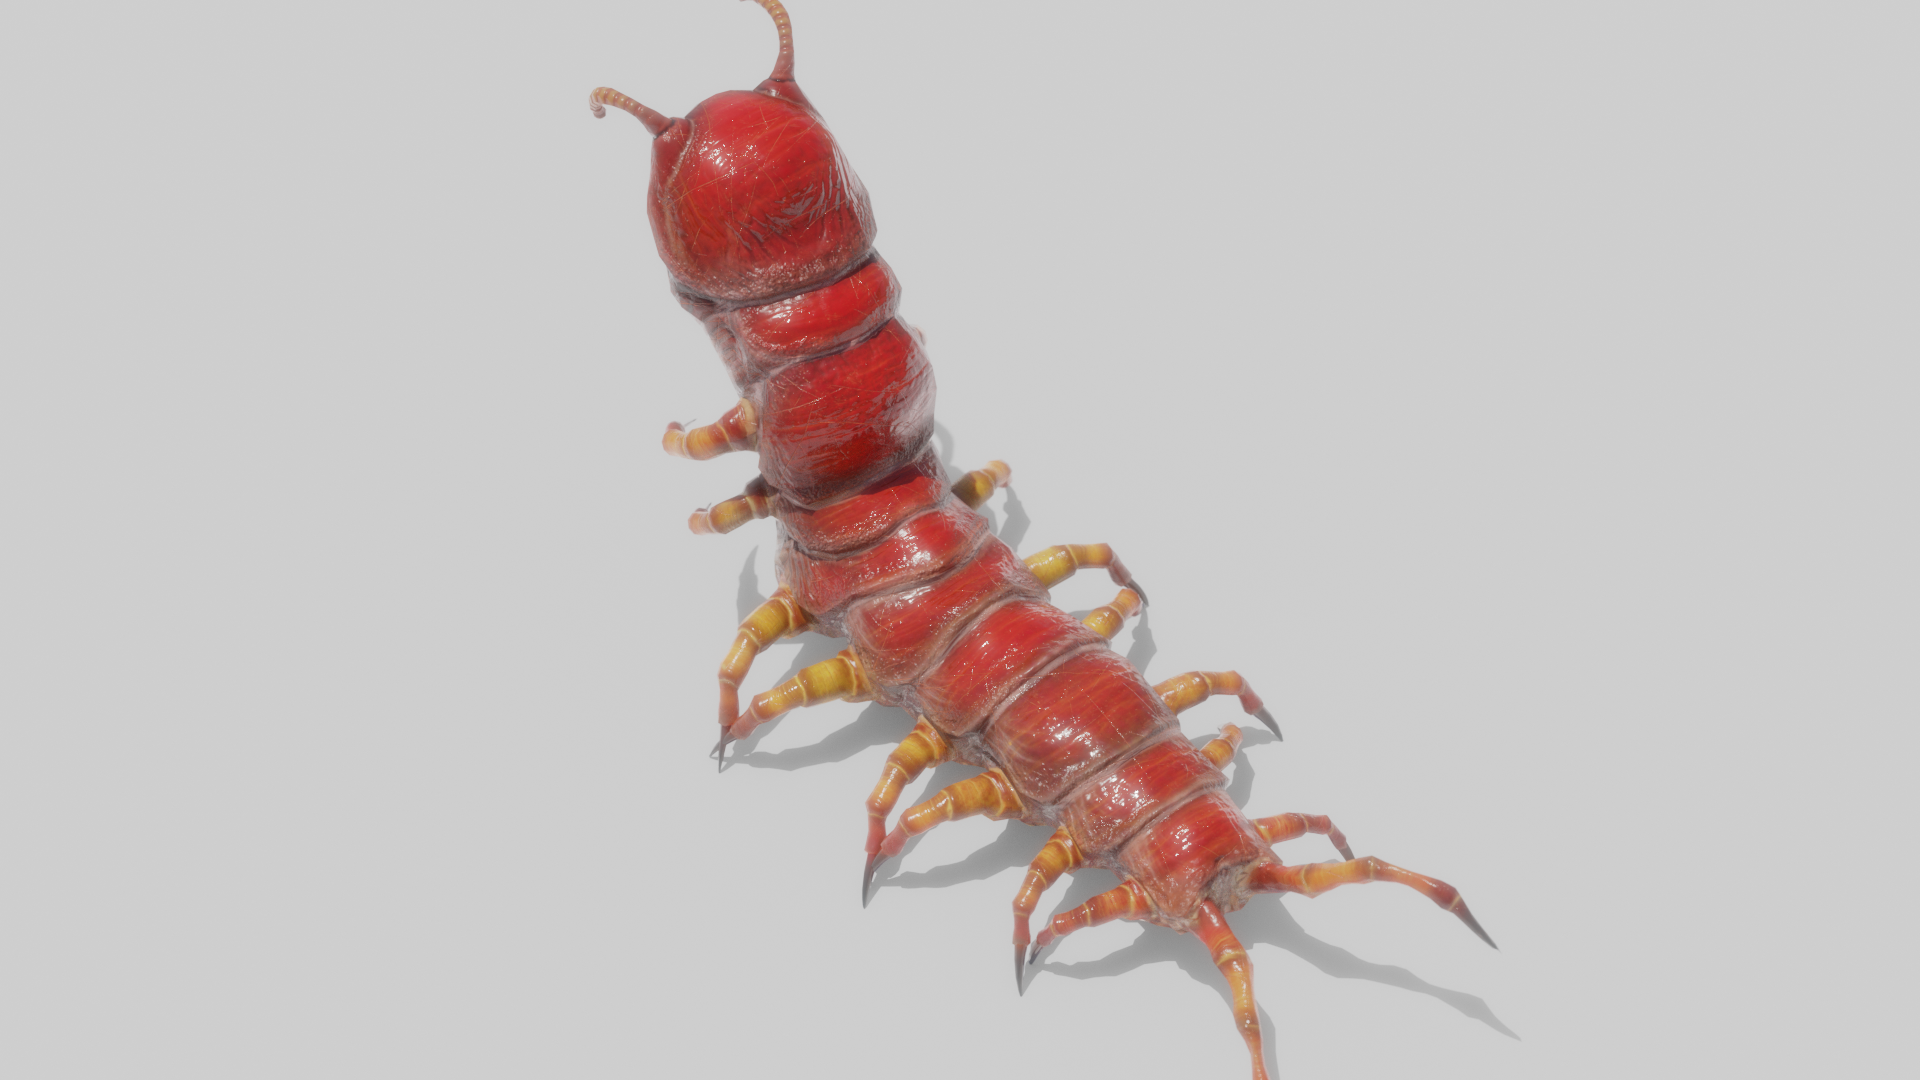 Centipede monster, crawling top view.